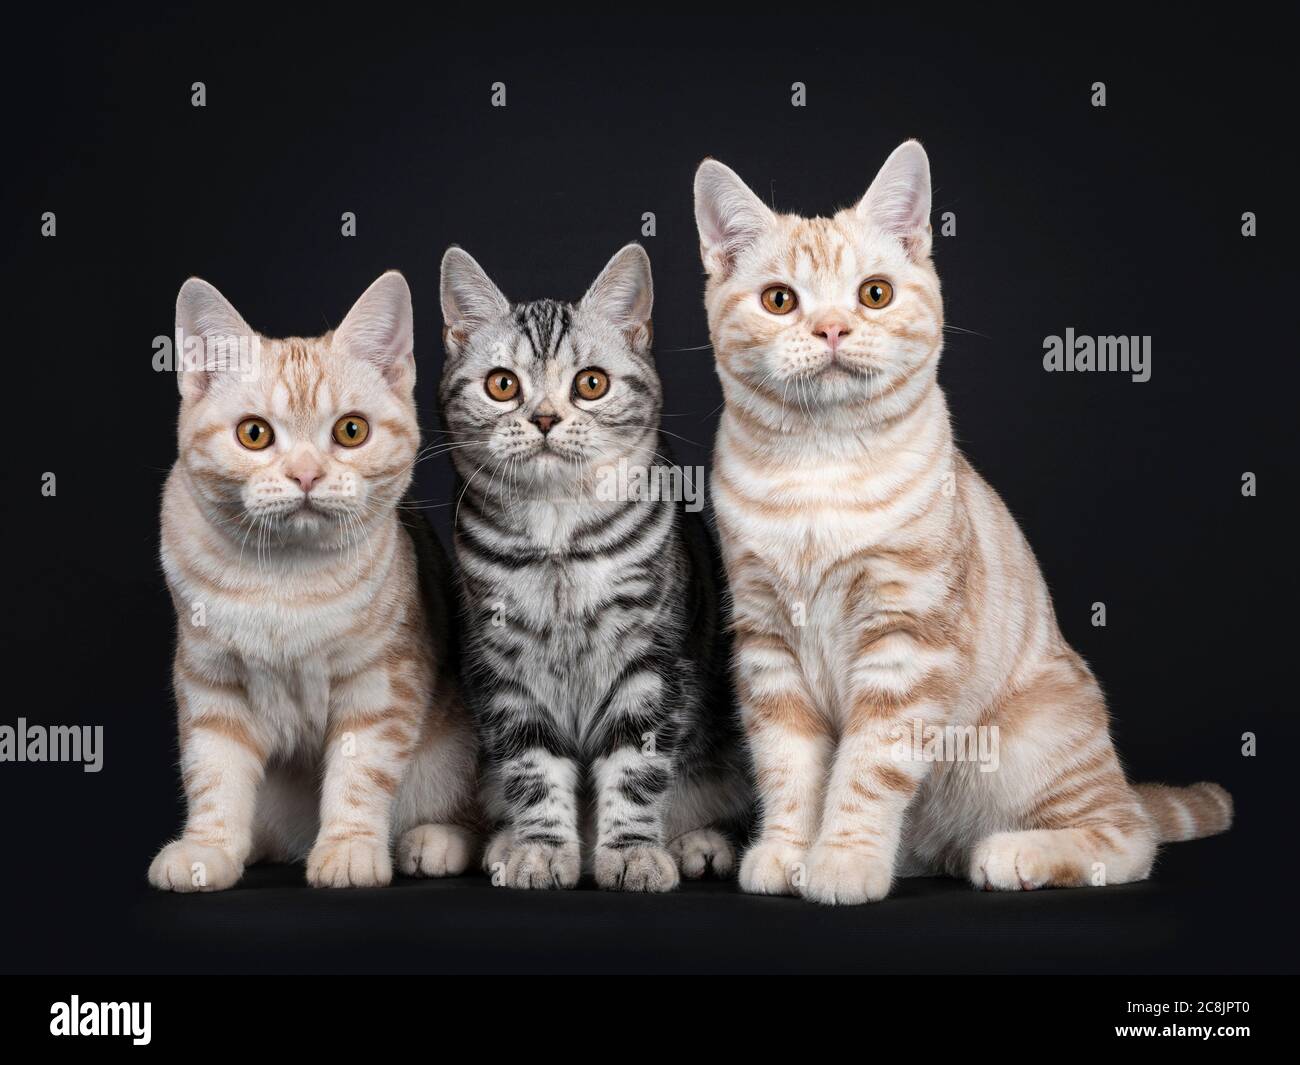 Row of three kittens sitting beside each other. All looking towards camera with orange eyes. Isolated on black background. Stock Photo